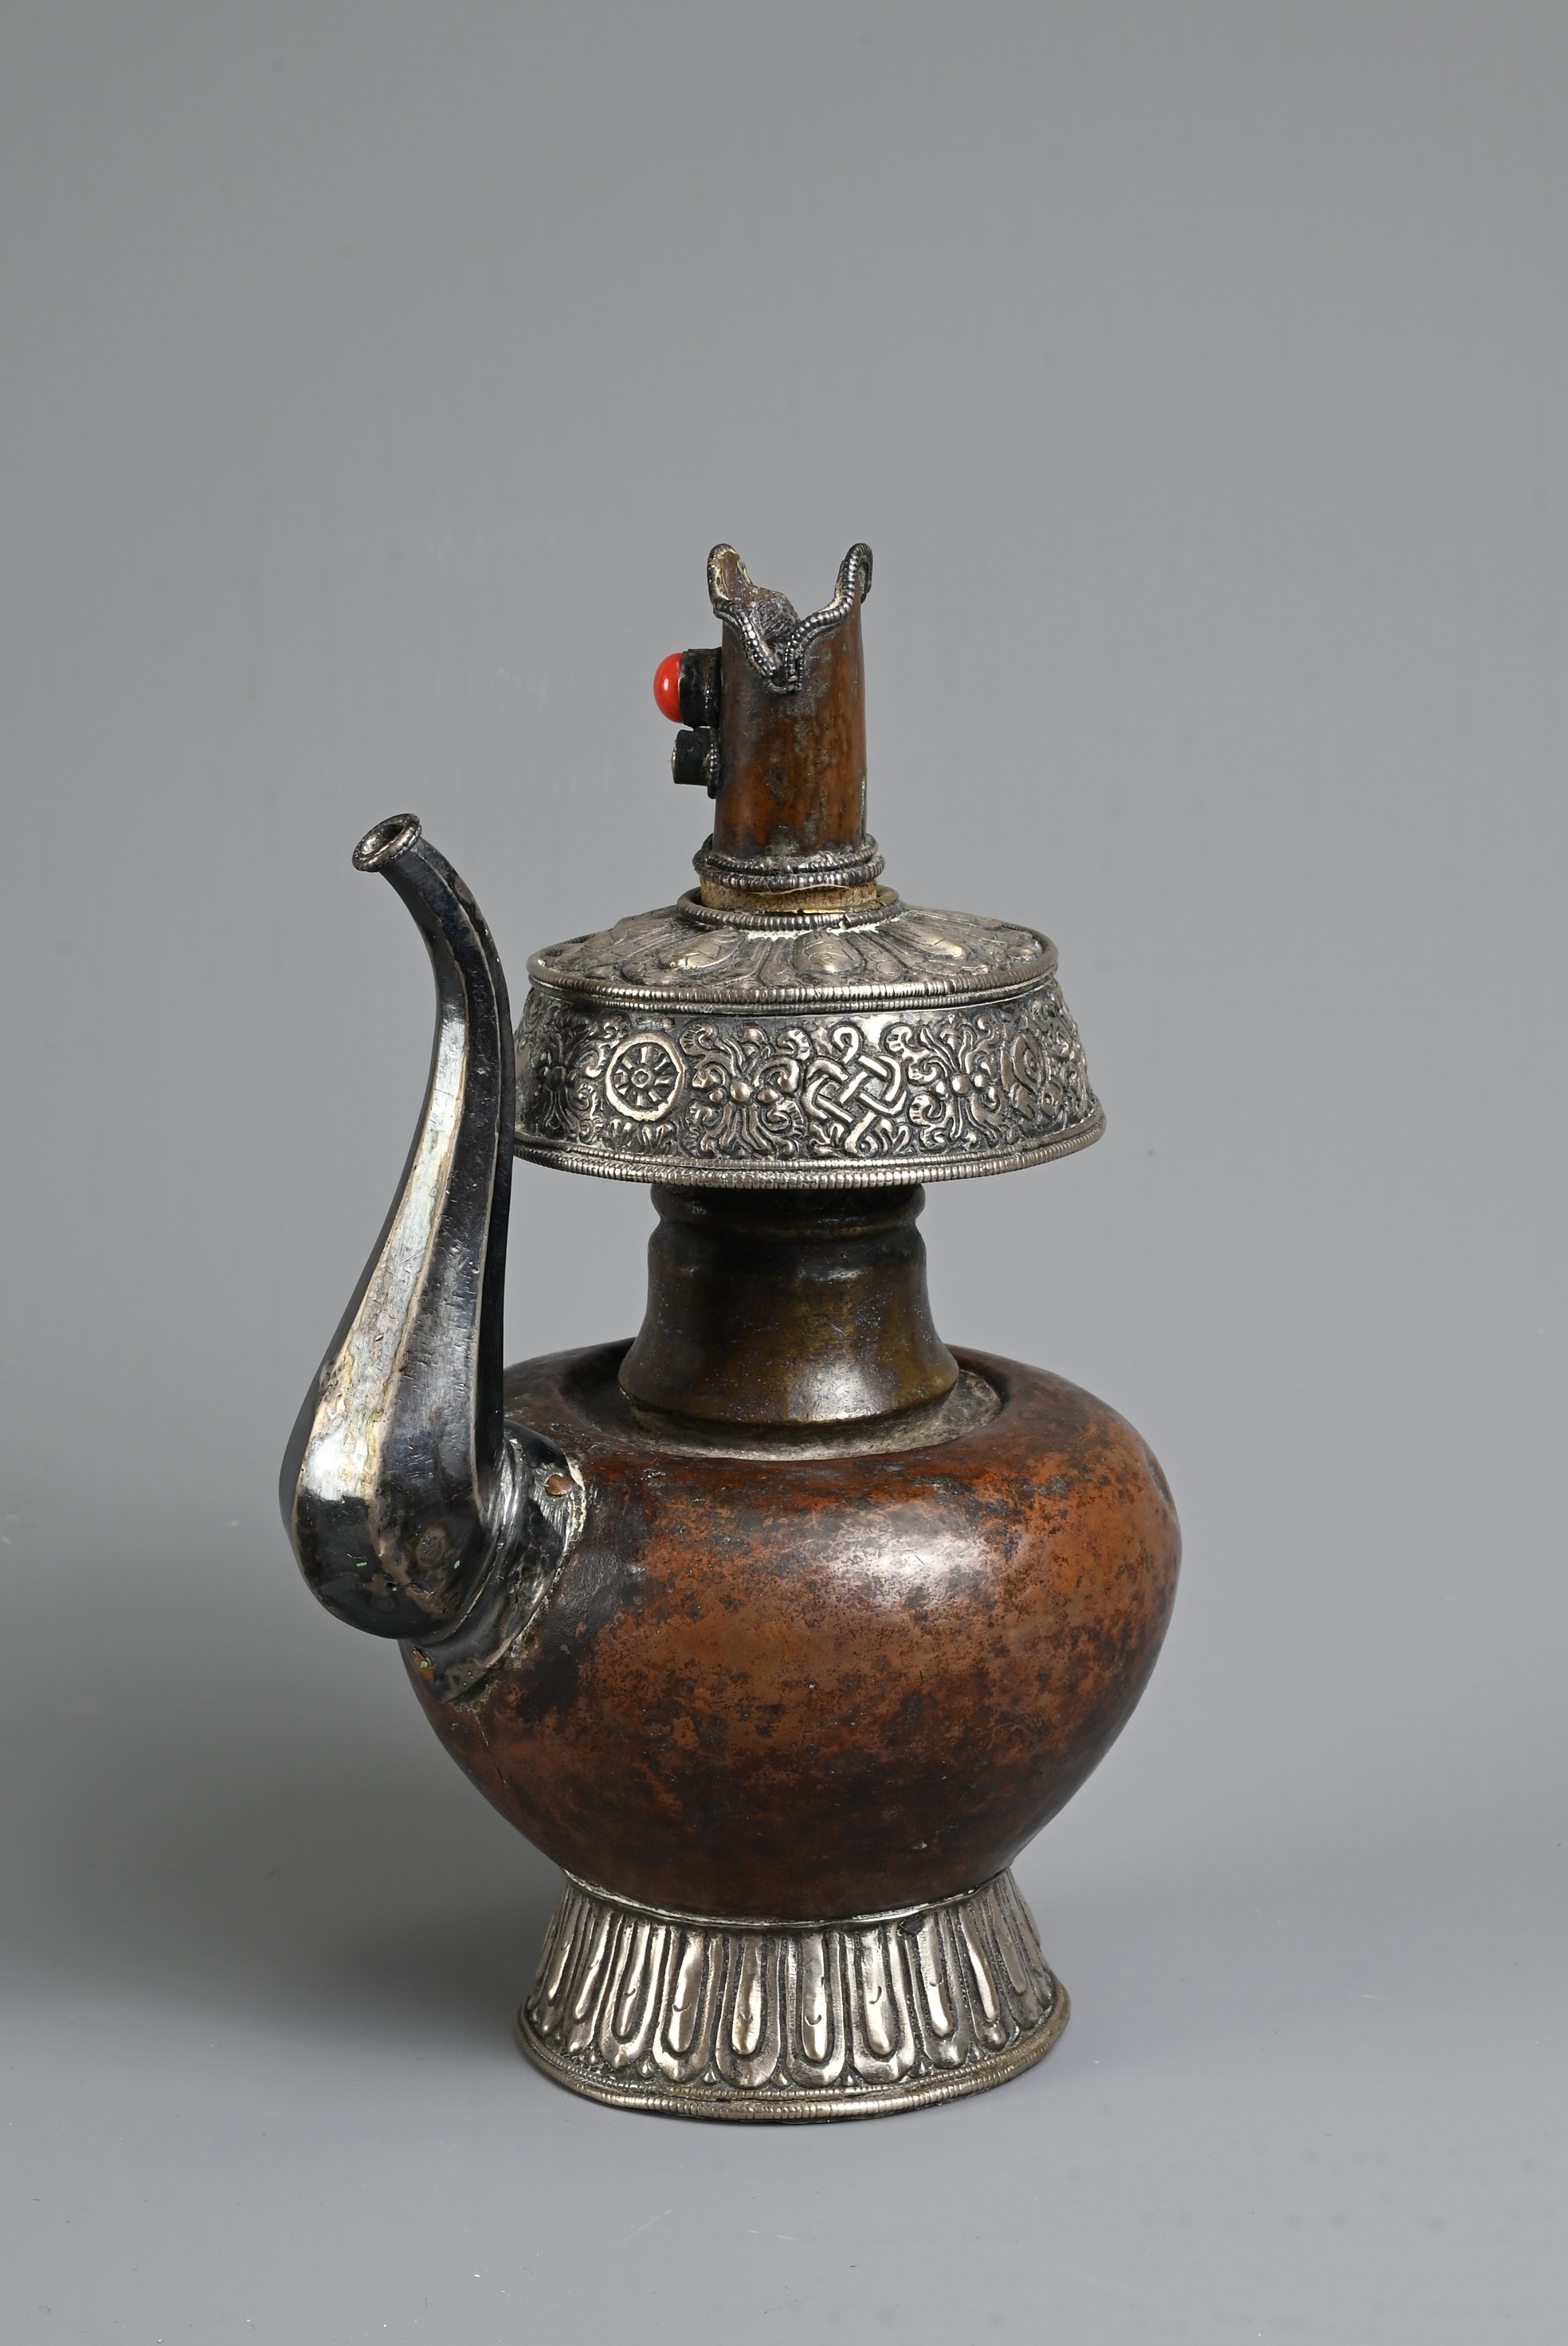 A TIBETAN COPPER AND SILVER EWER, BUMPA, 19/20TH CENTURY. With copper body and splayed silver foot